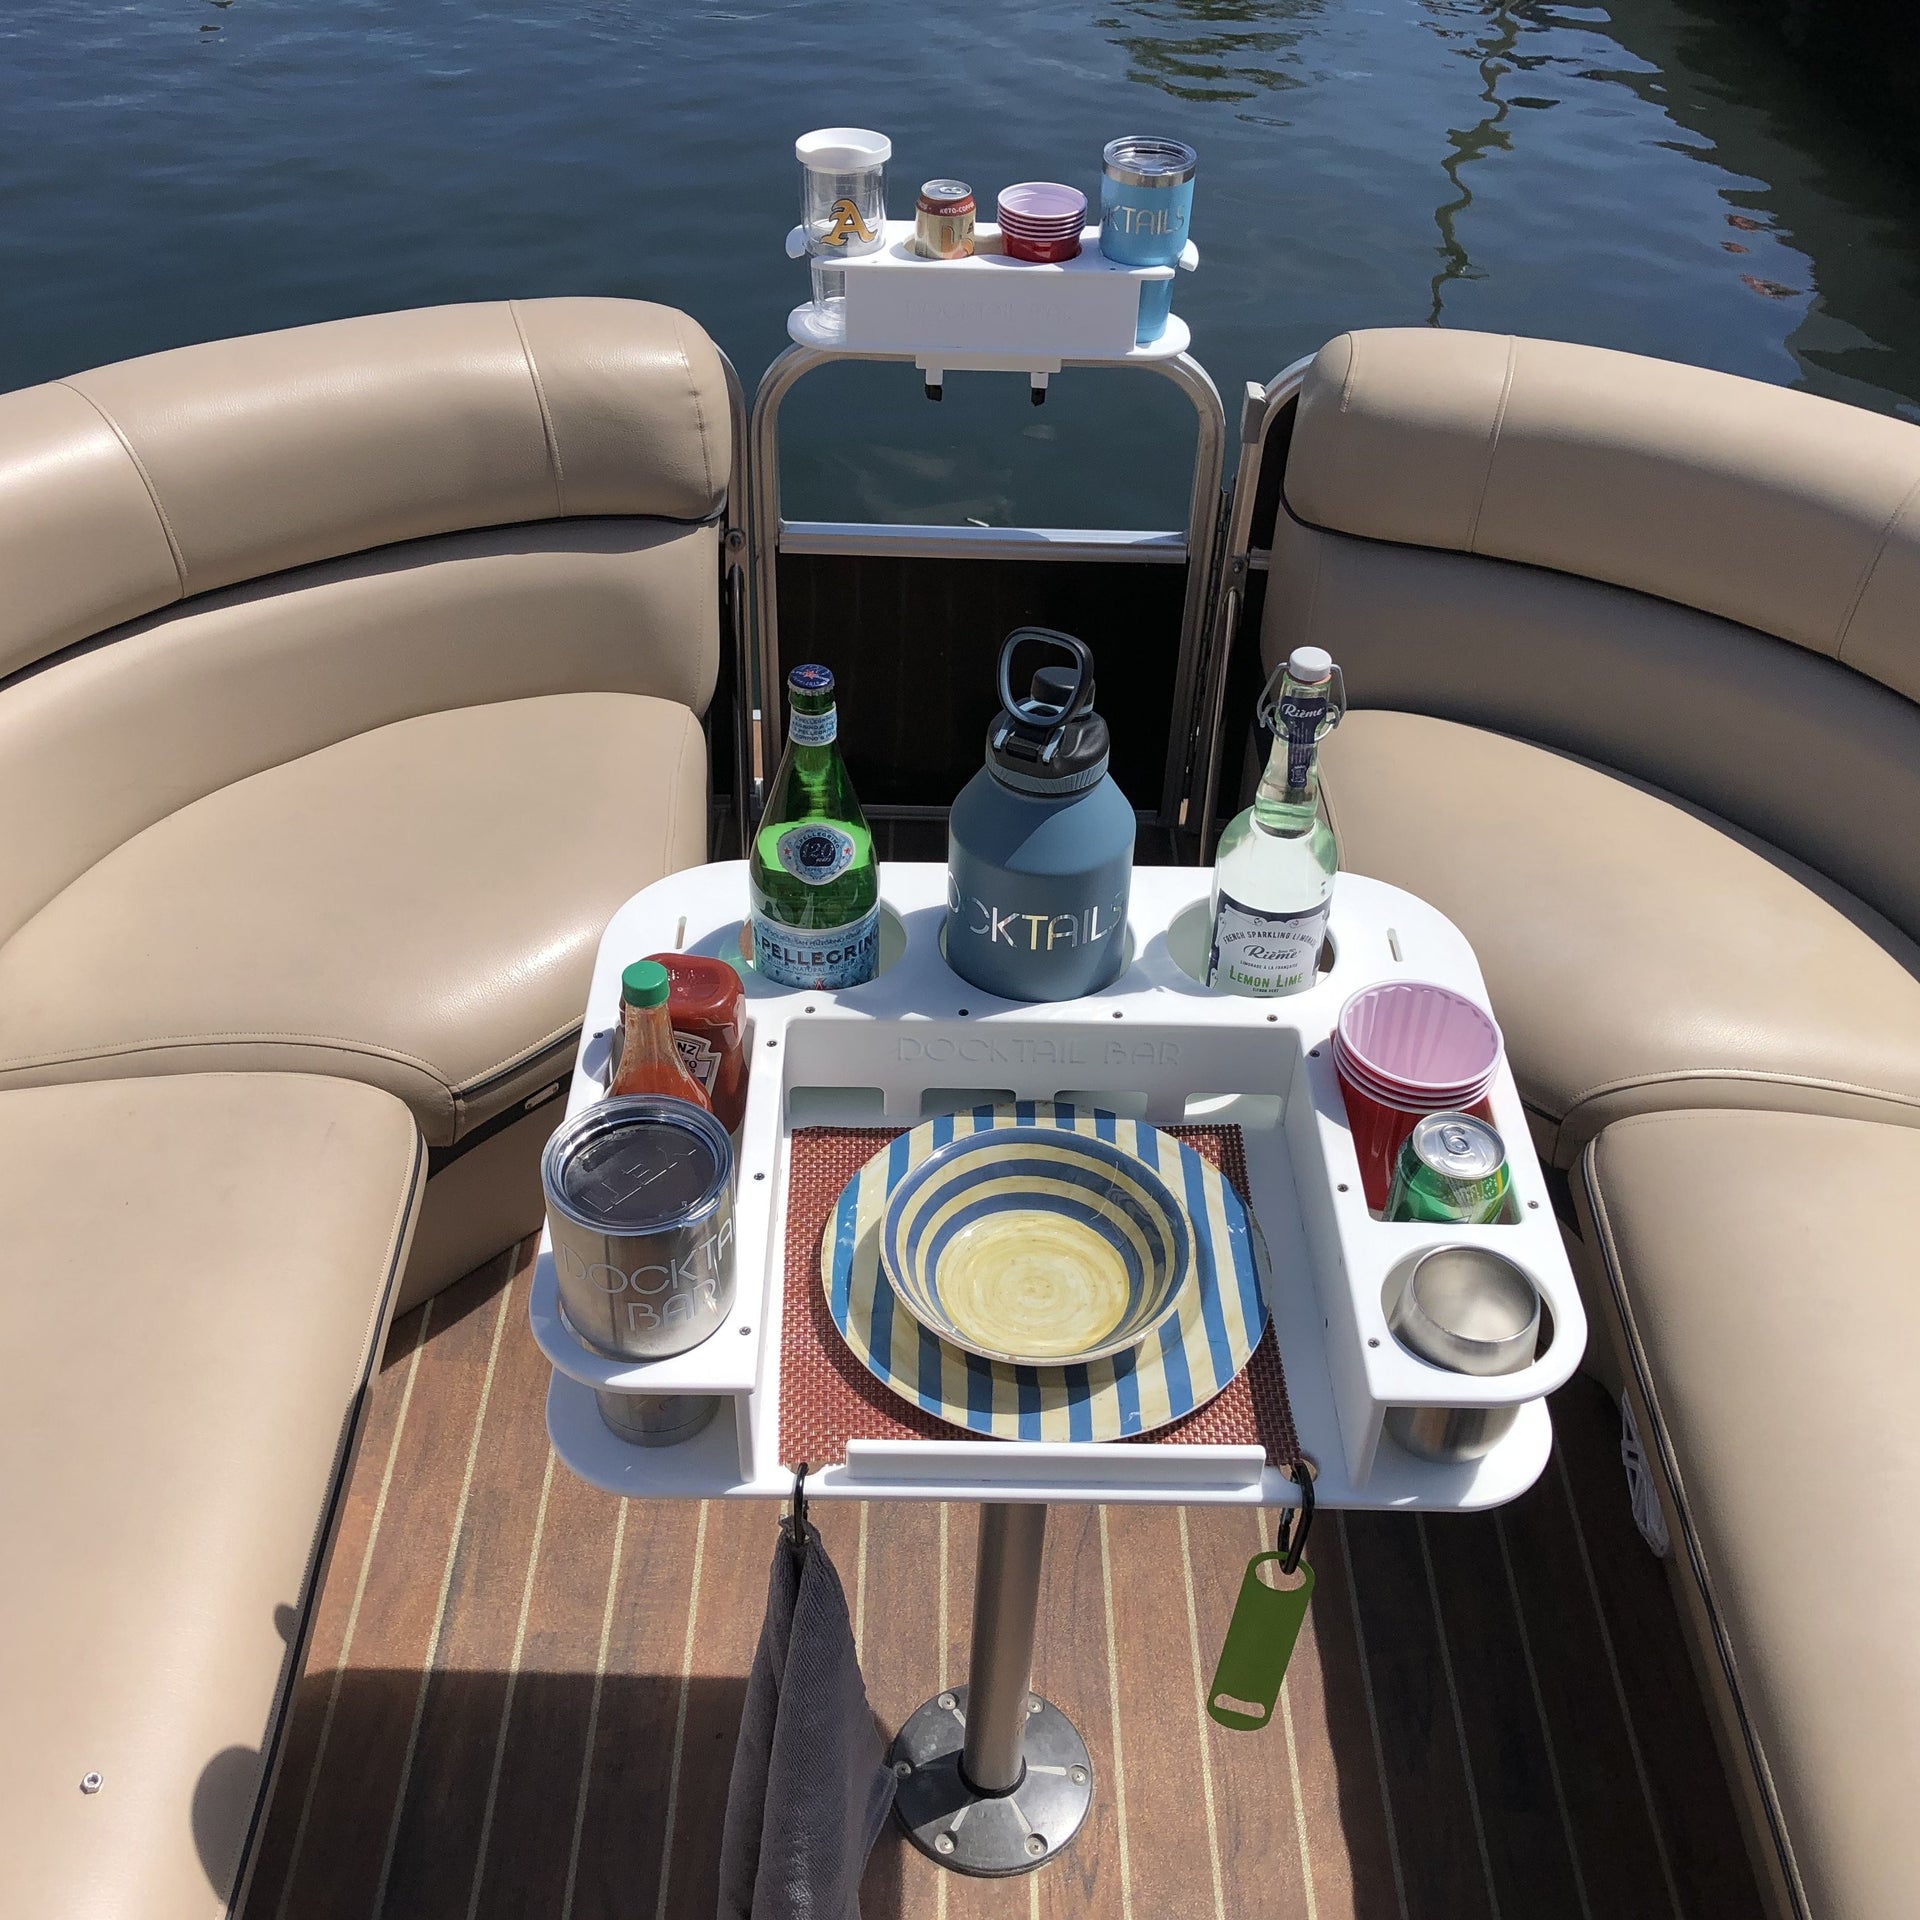 Docktail Butler Boat Table Caddy Organizer - with Pedestal Adapter Plate (Post/Floor Mount Not Included) | Portable Boat Bar with Cup Holders, Boat